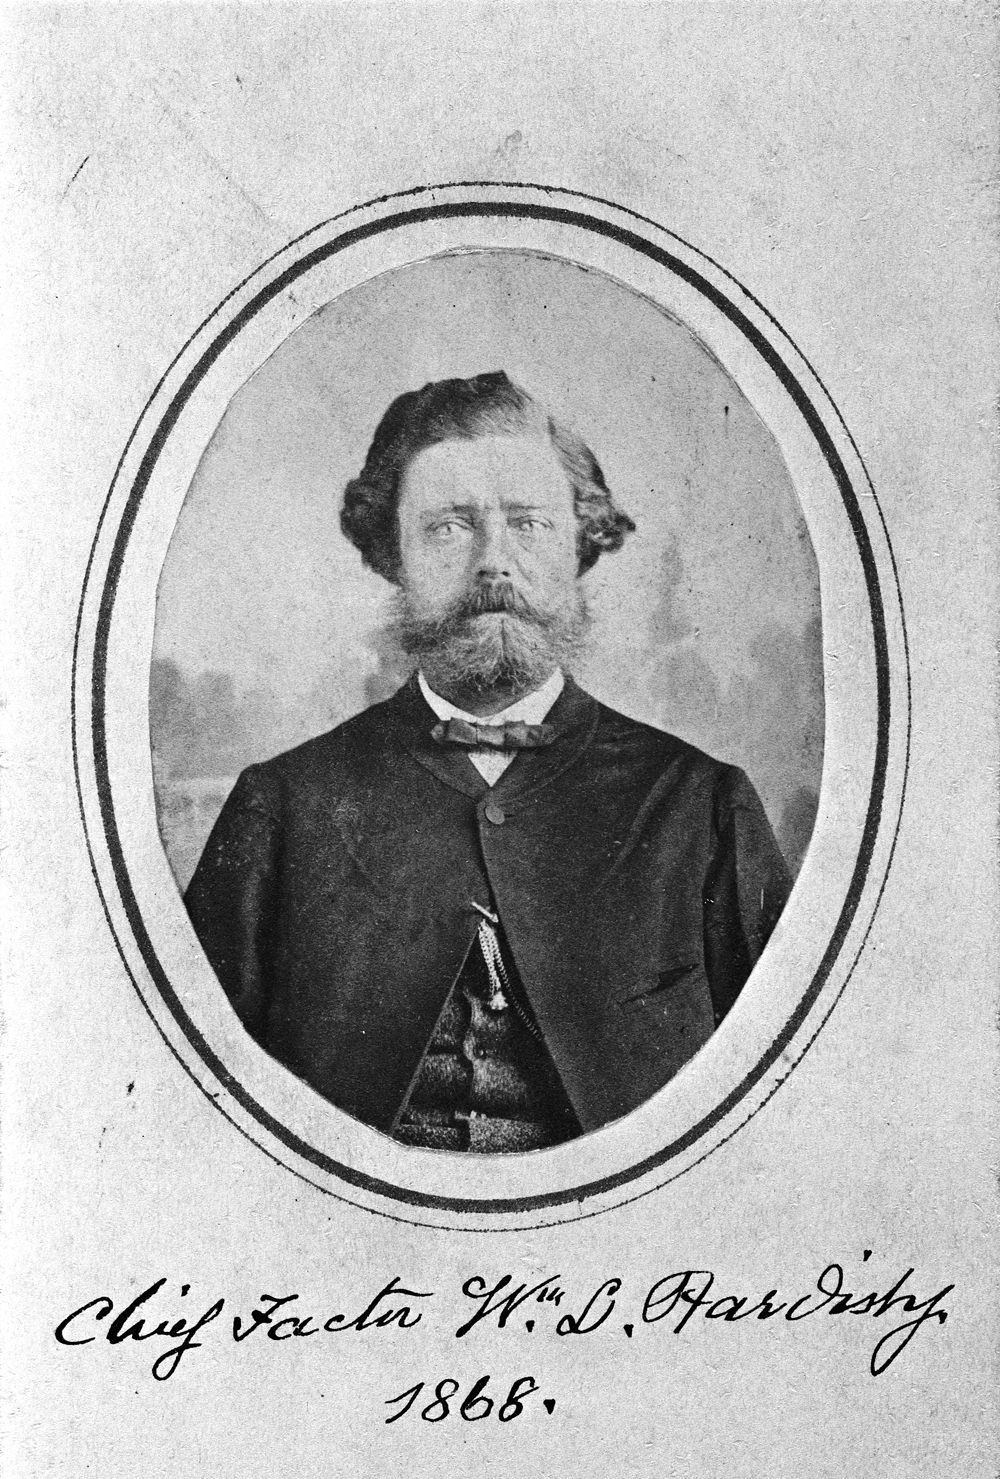 Photo of Belle's father, William Hardisty, 1868